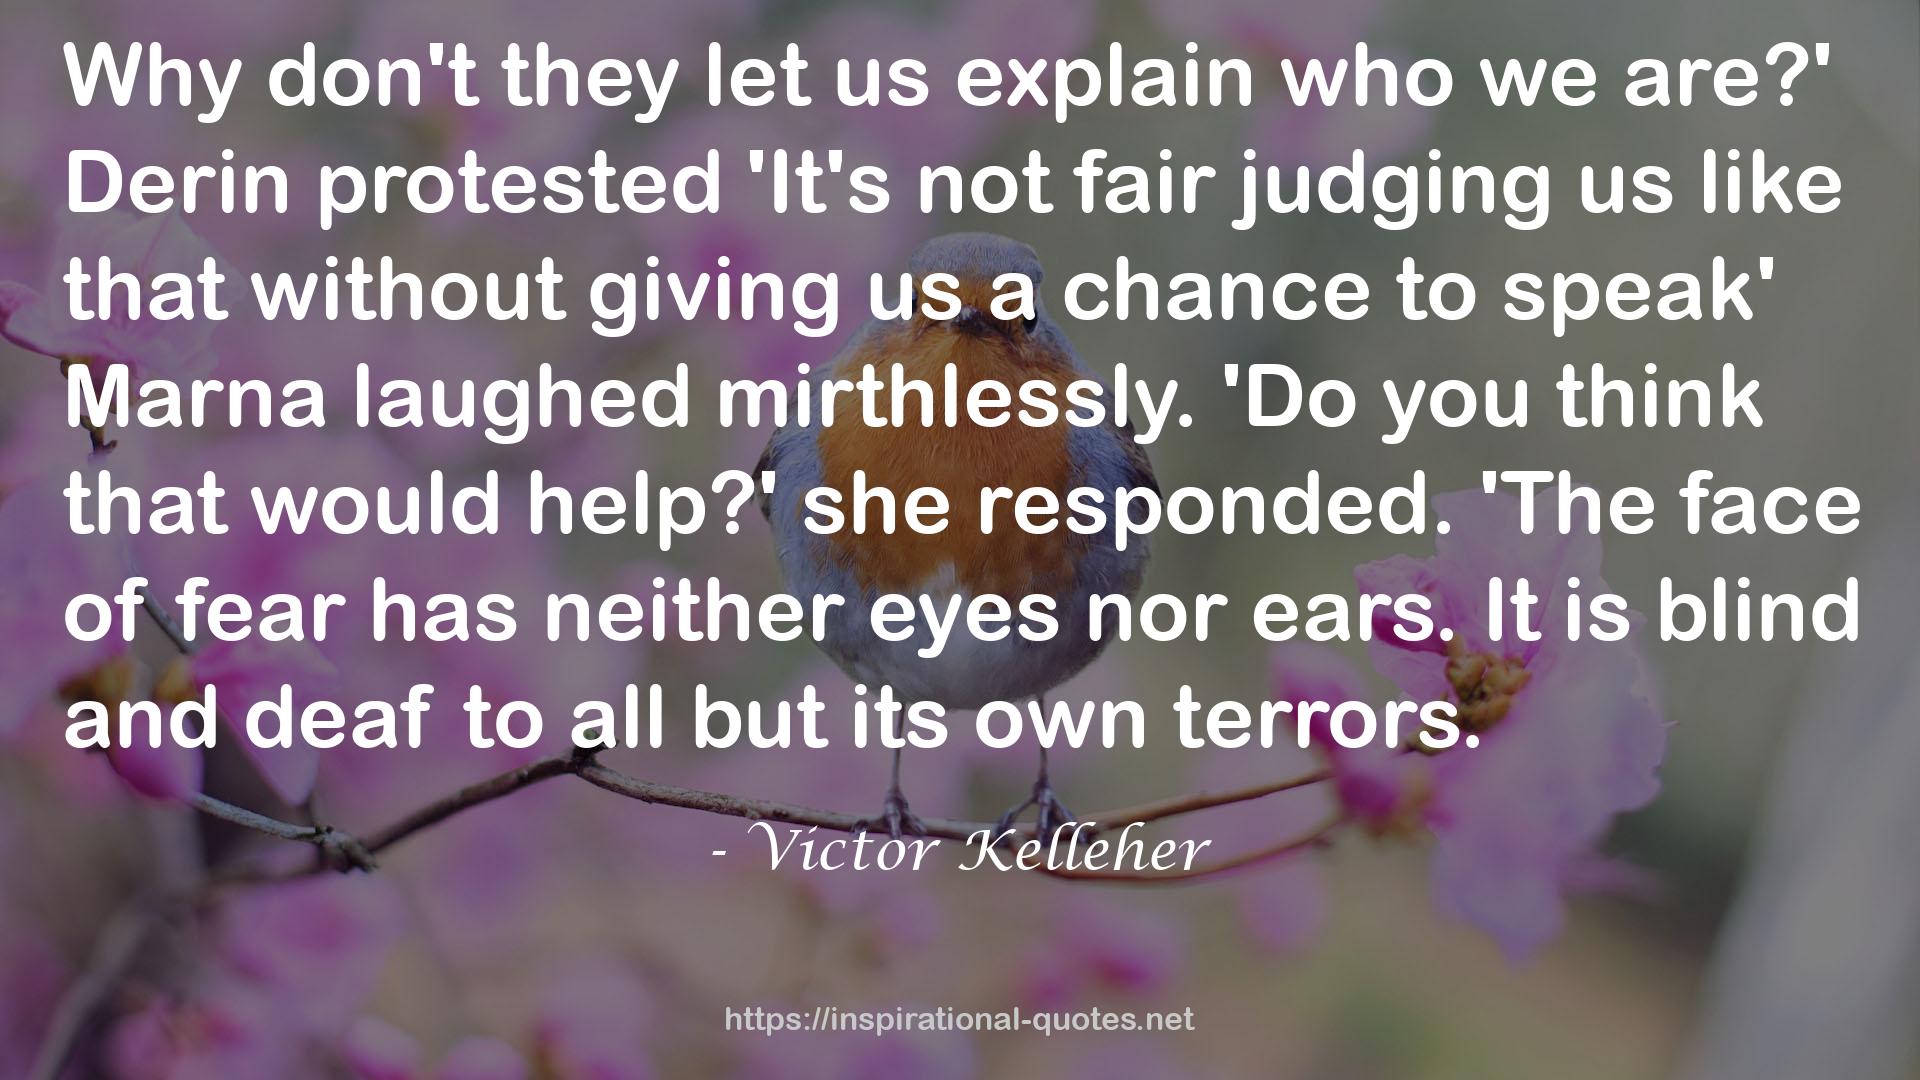 Victor Kelleher QUOTES